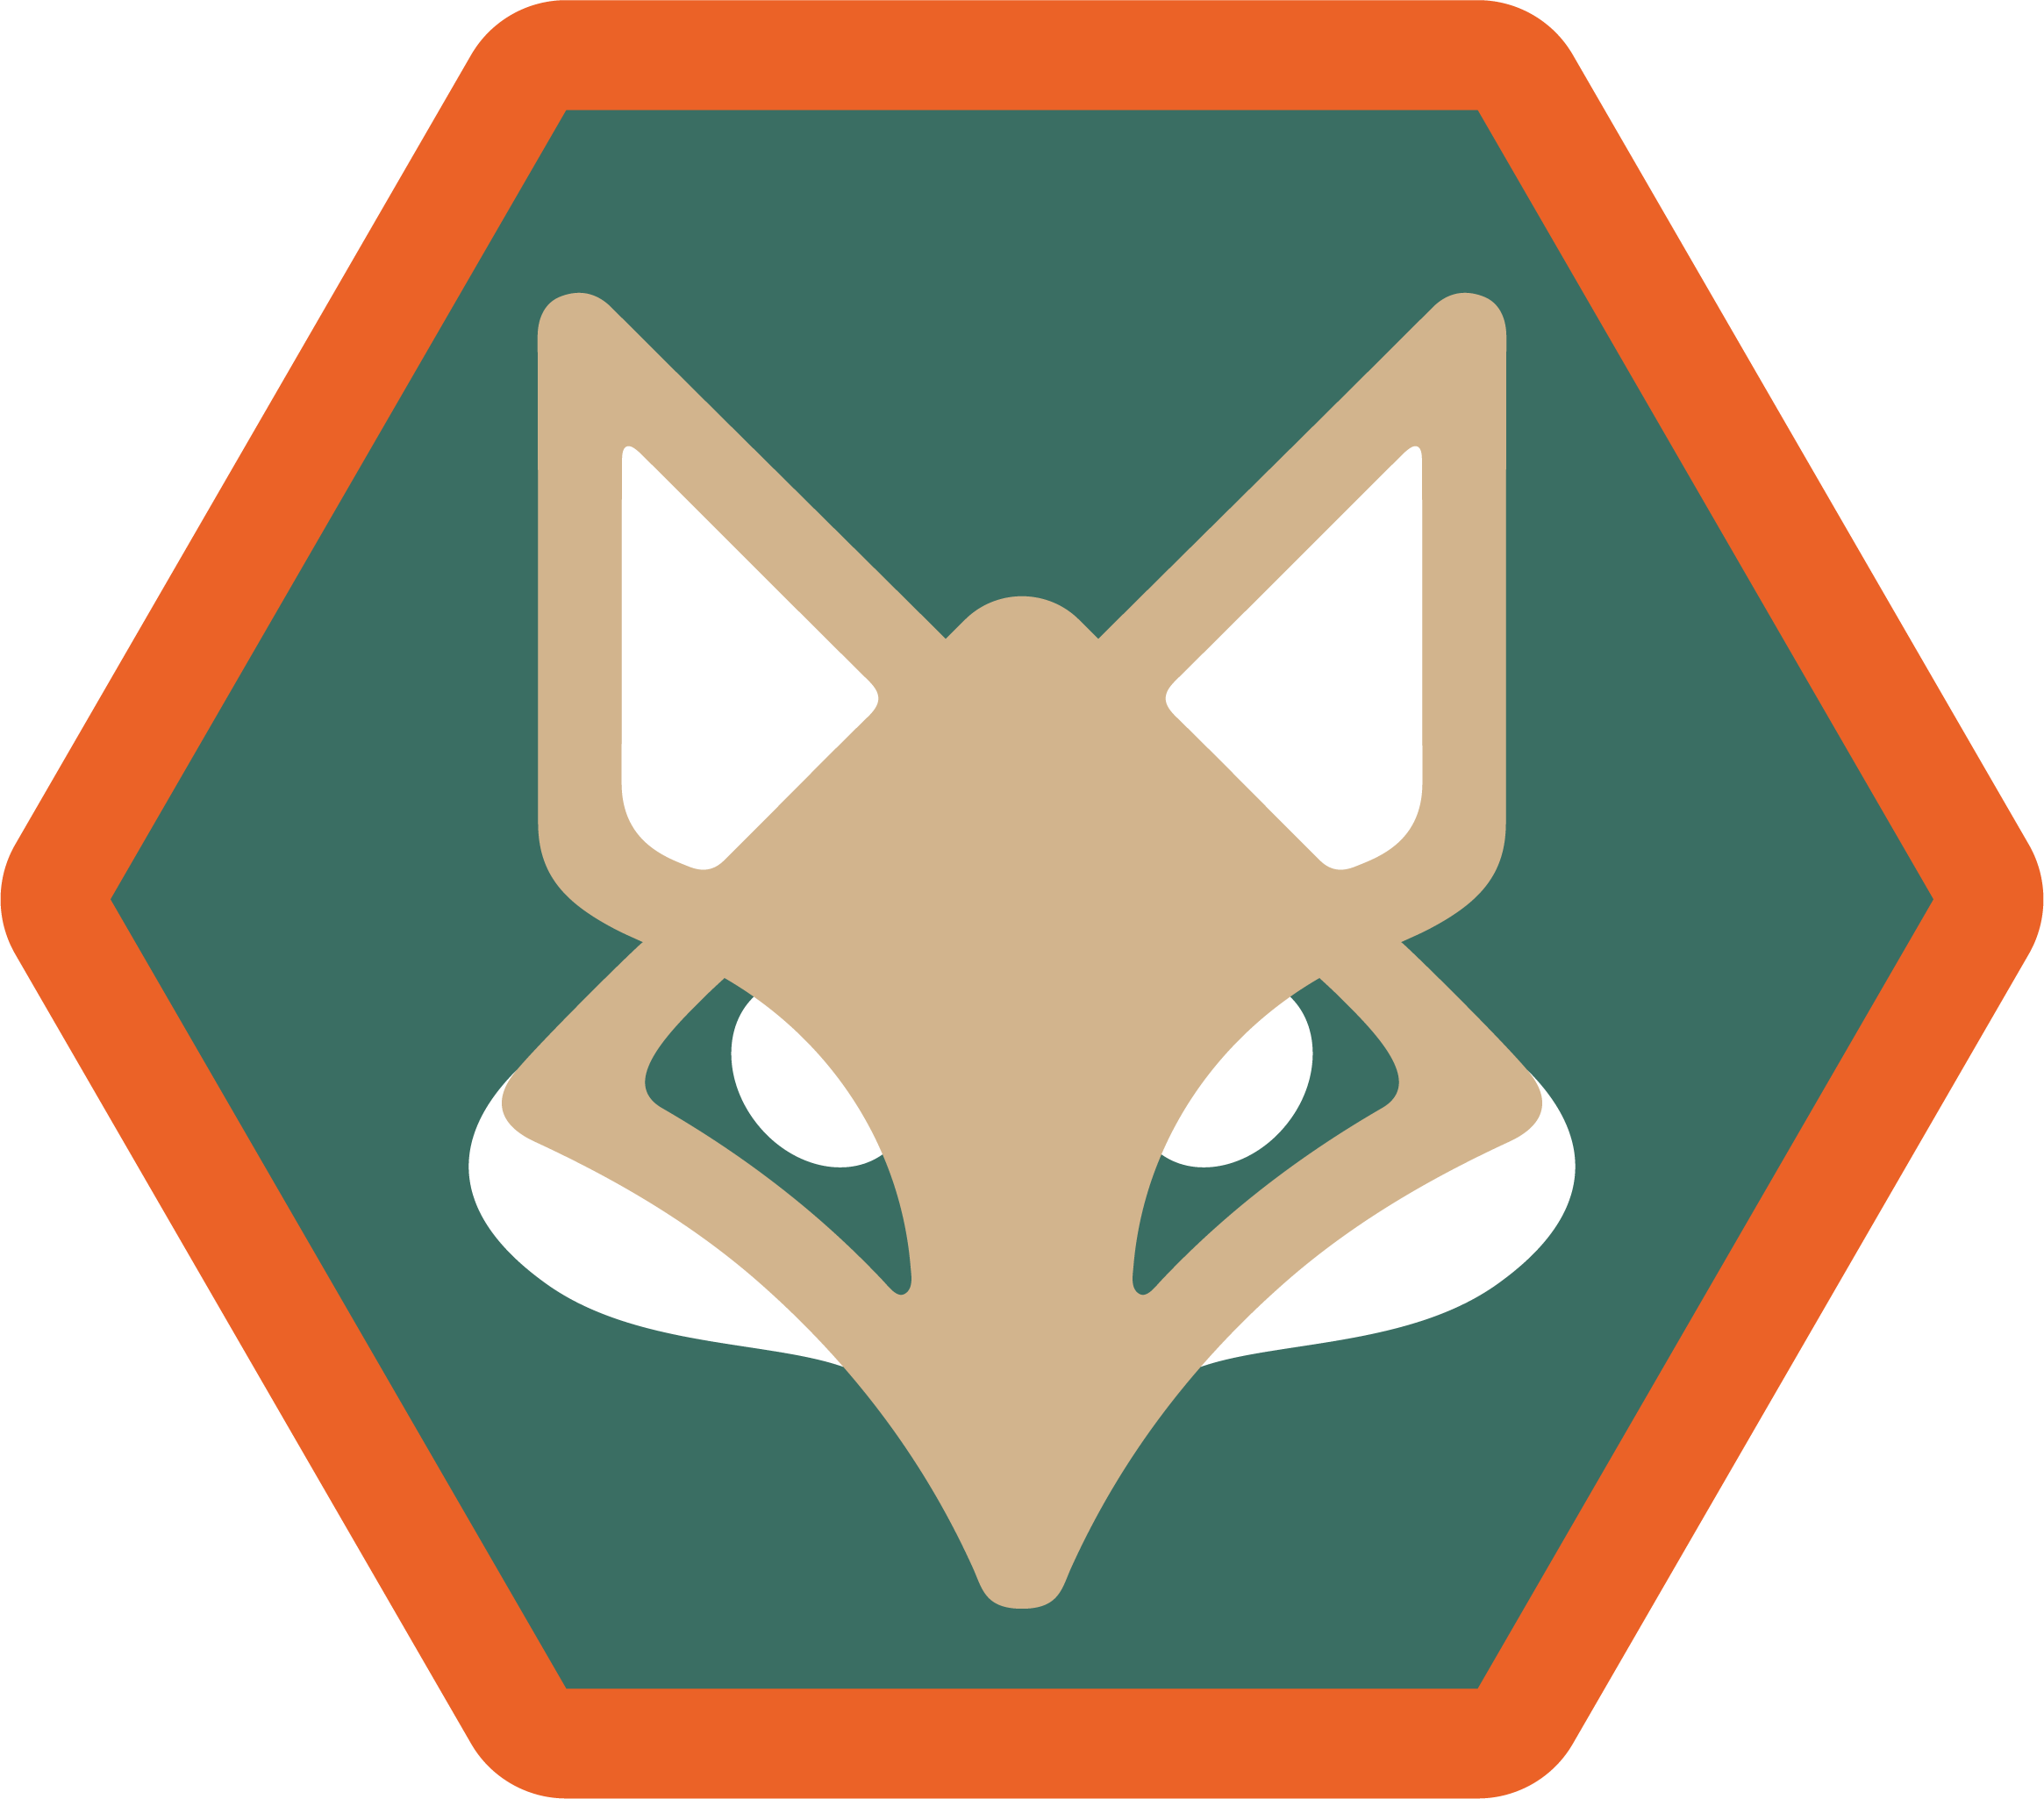 an illustrated fox in a hexagon, the logo of the event